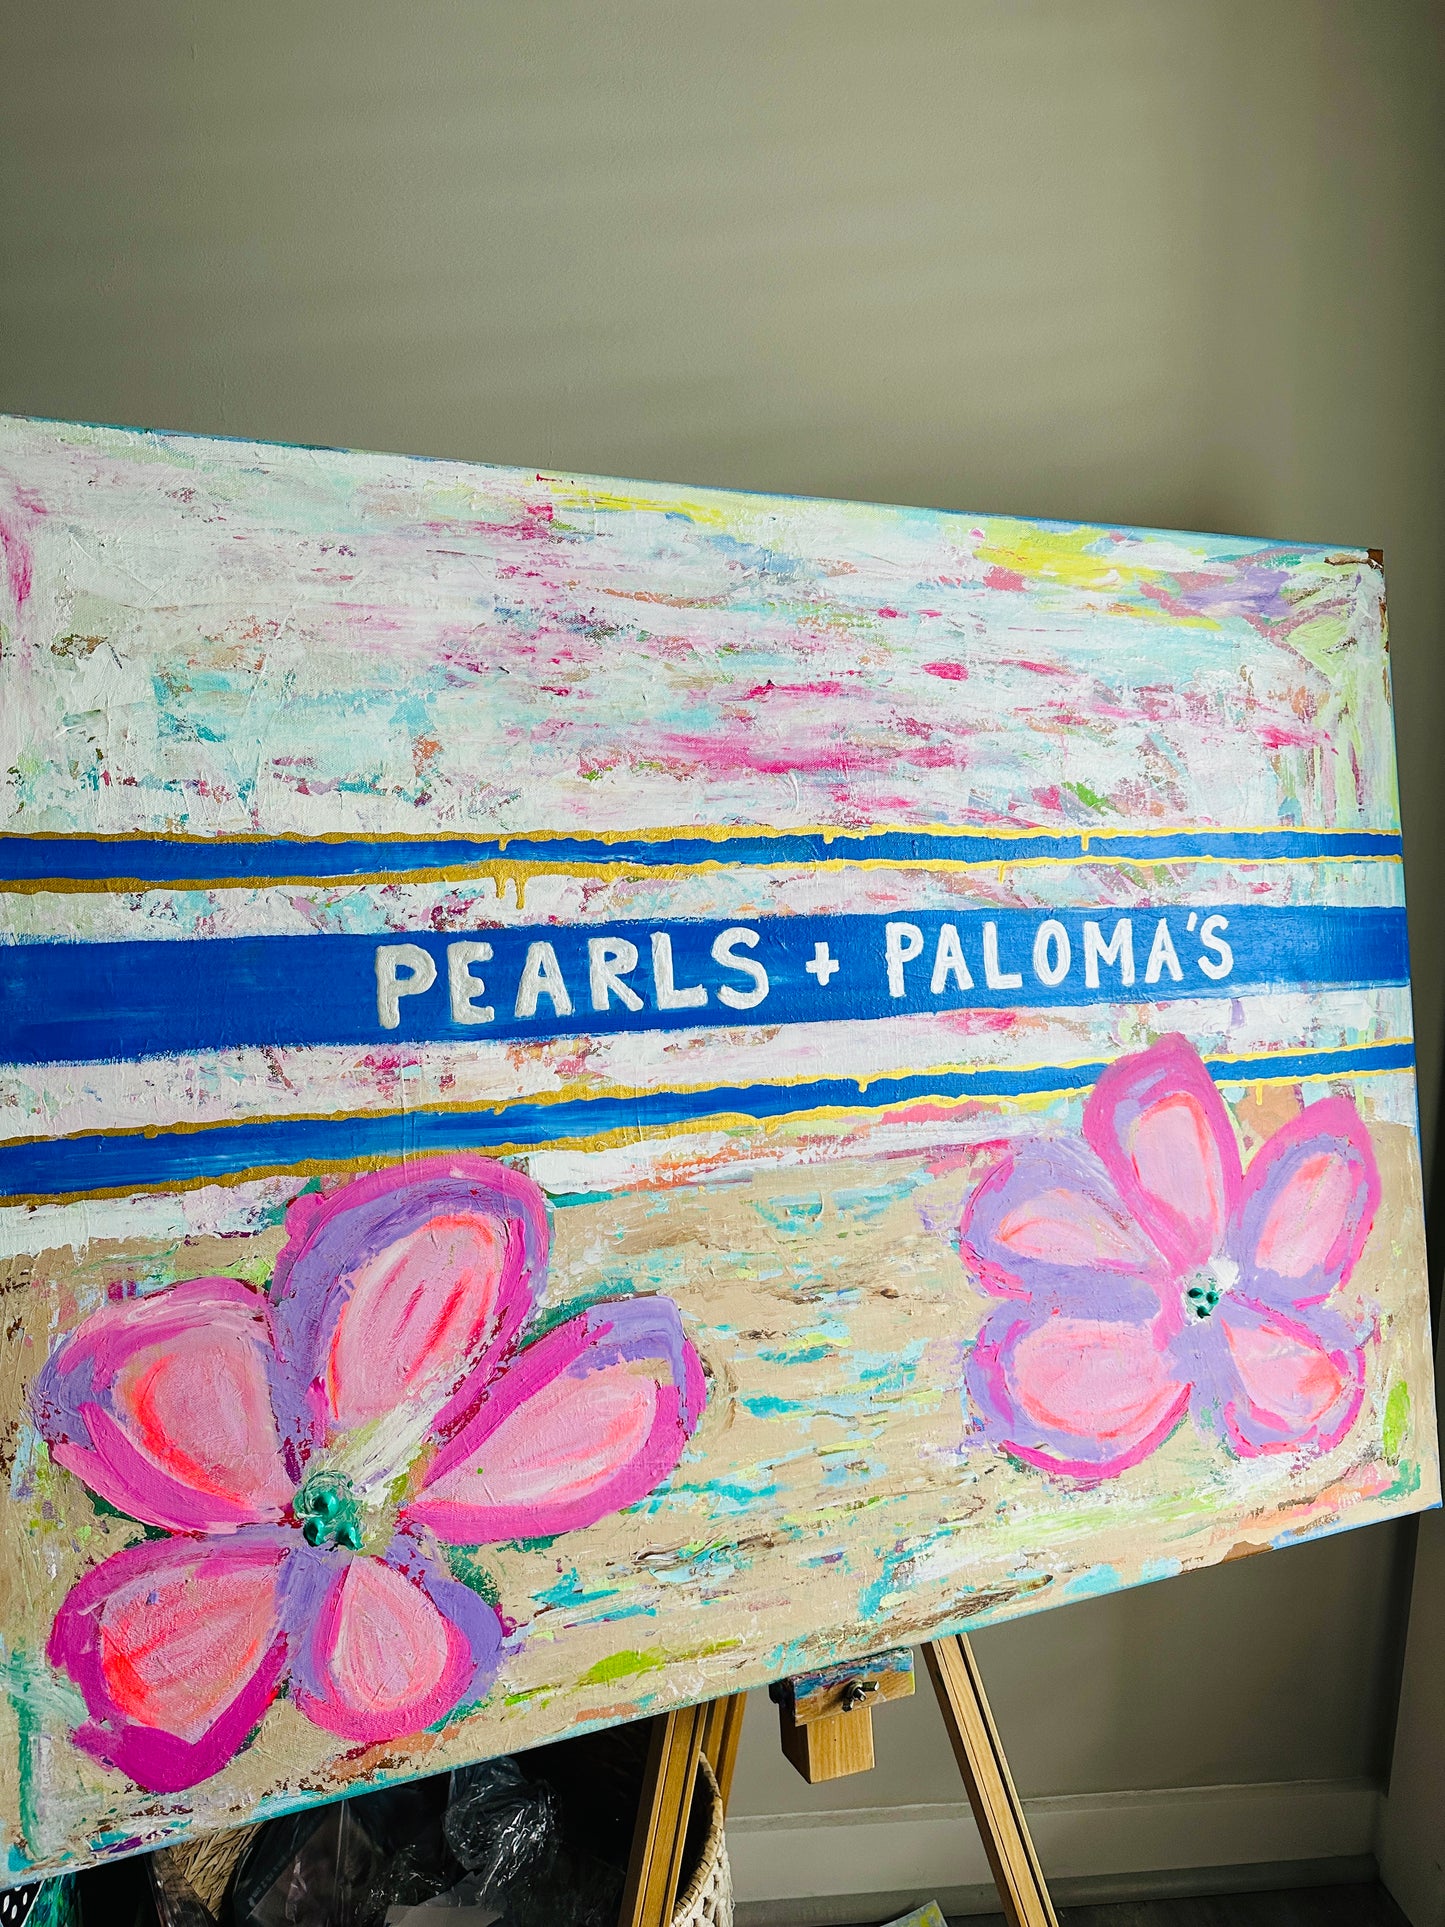 Pearls and Paloma’s